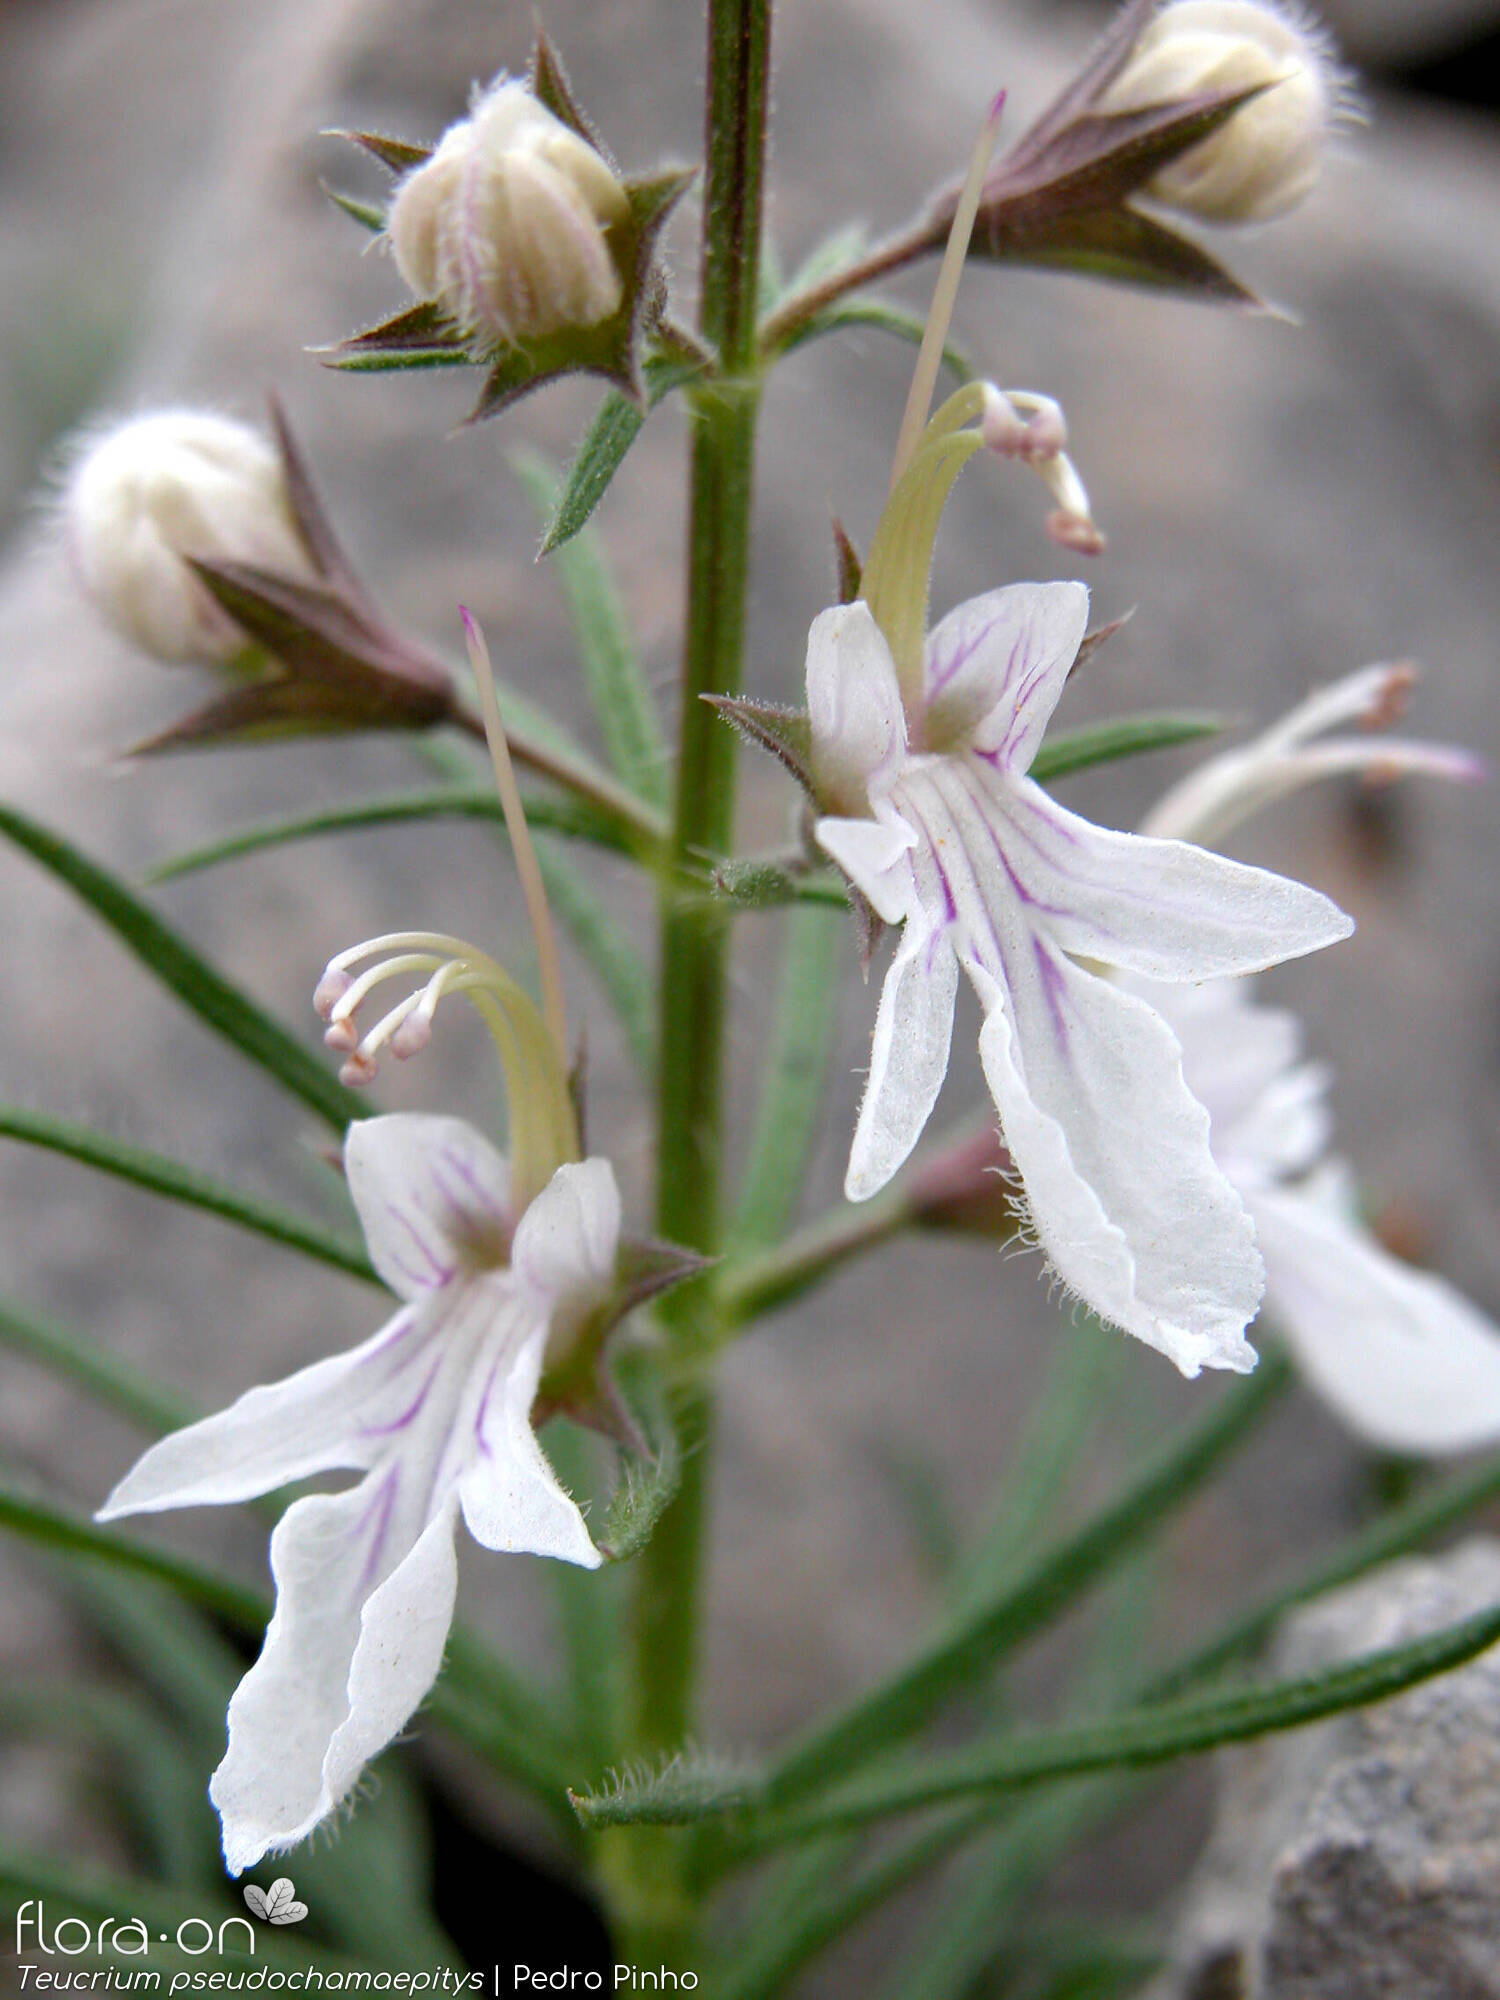 Teucrium pseudochamaepitys - Flor (geral) | Pedro Pinho; CC BY-NC 4.0